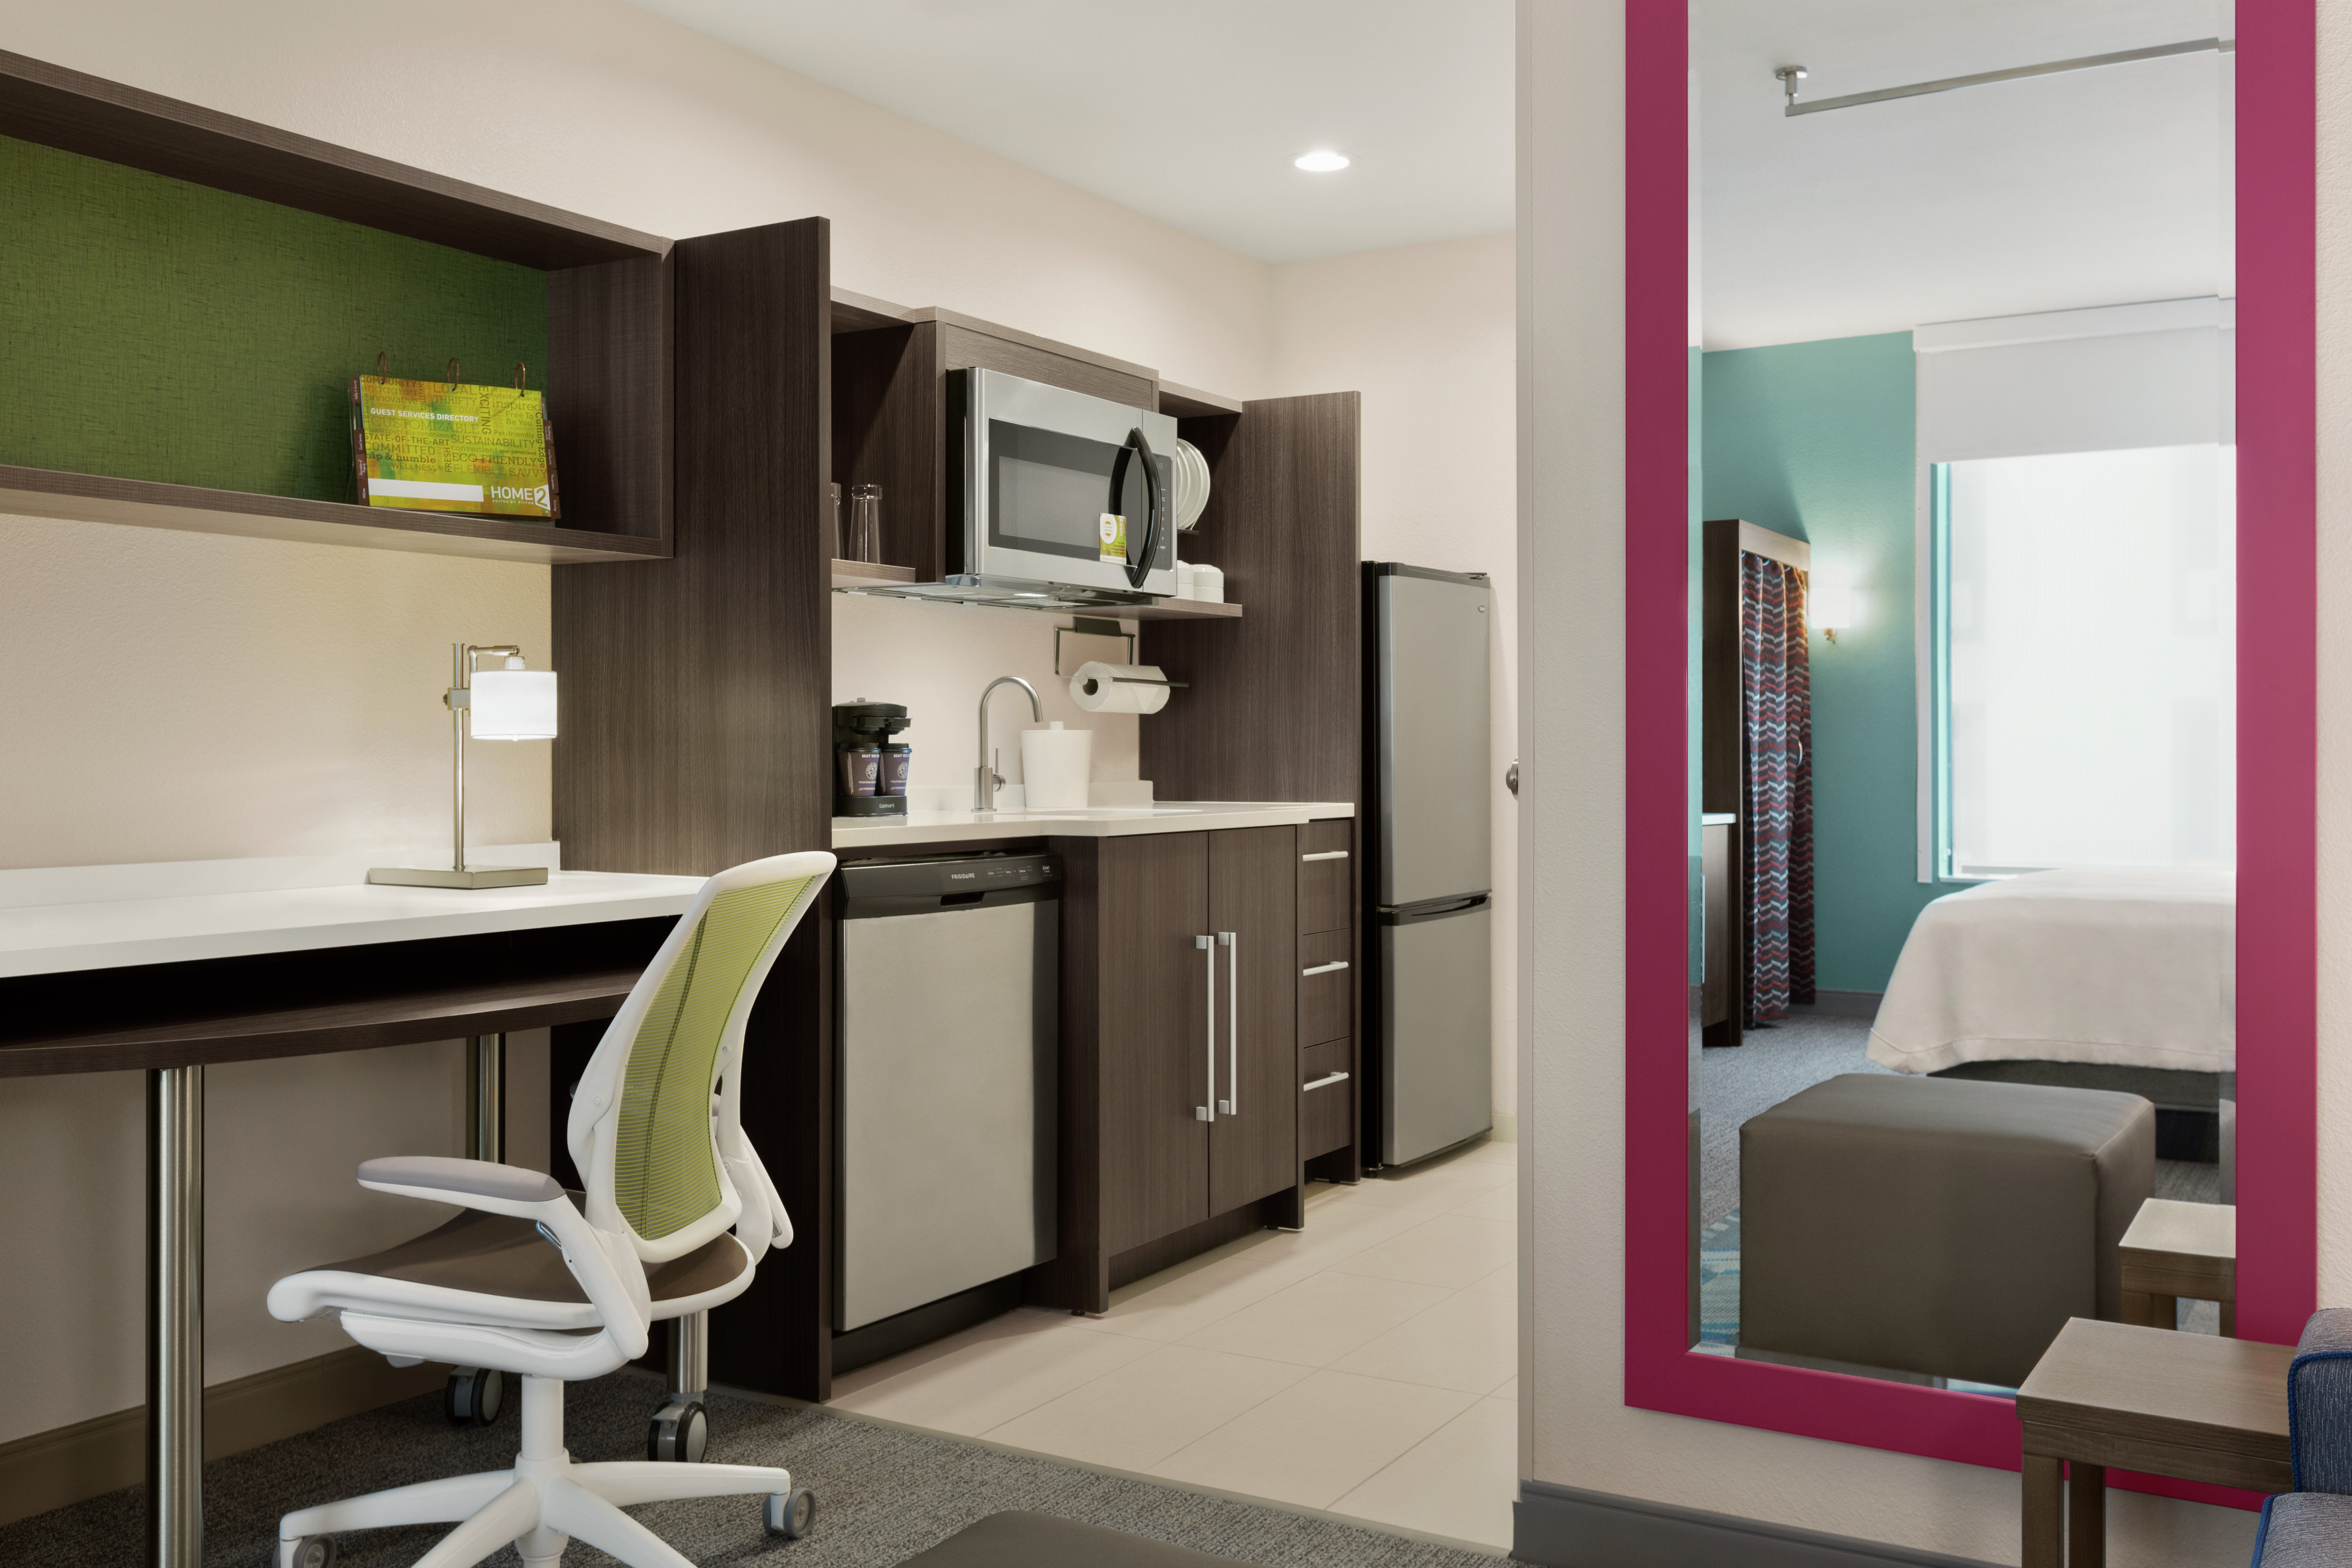 Spacious studio suite with fully equipped kitchen, work desk with ergonomic chair, and full length mirror on wall.